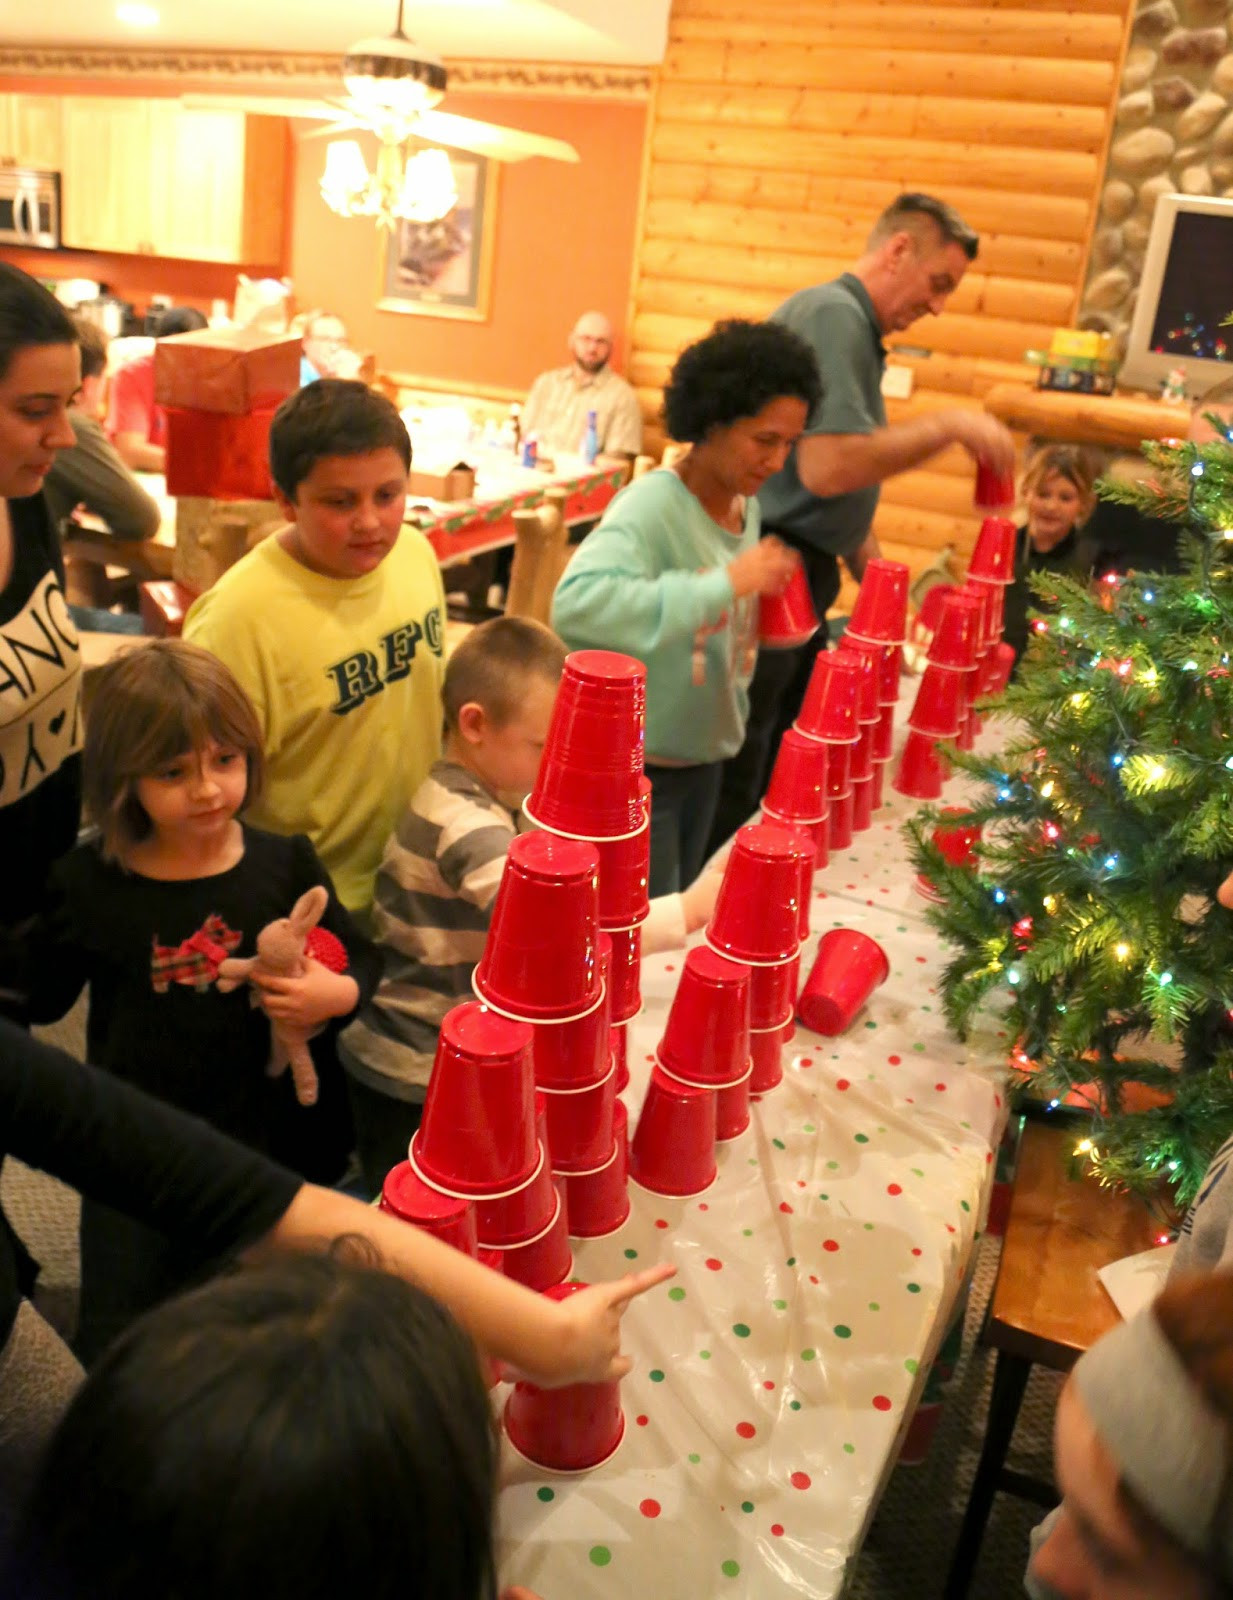 Family Holiday Party Ideas
 Notable Nest Fun Family Christmas Party Games to Try